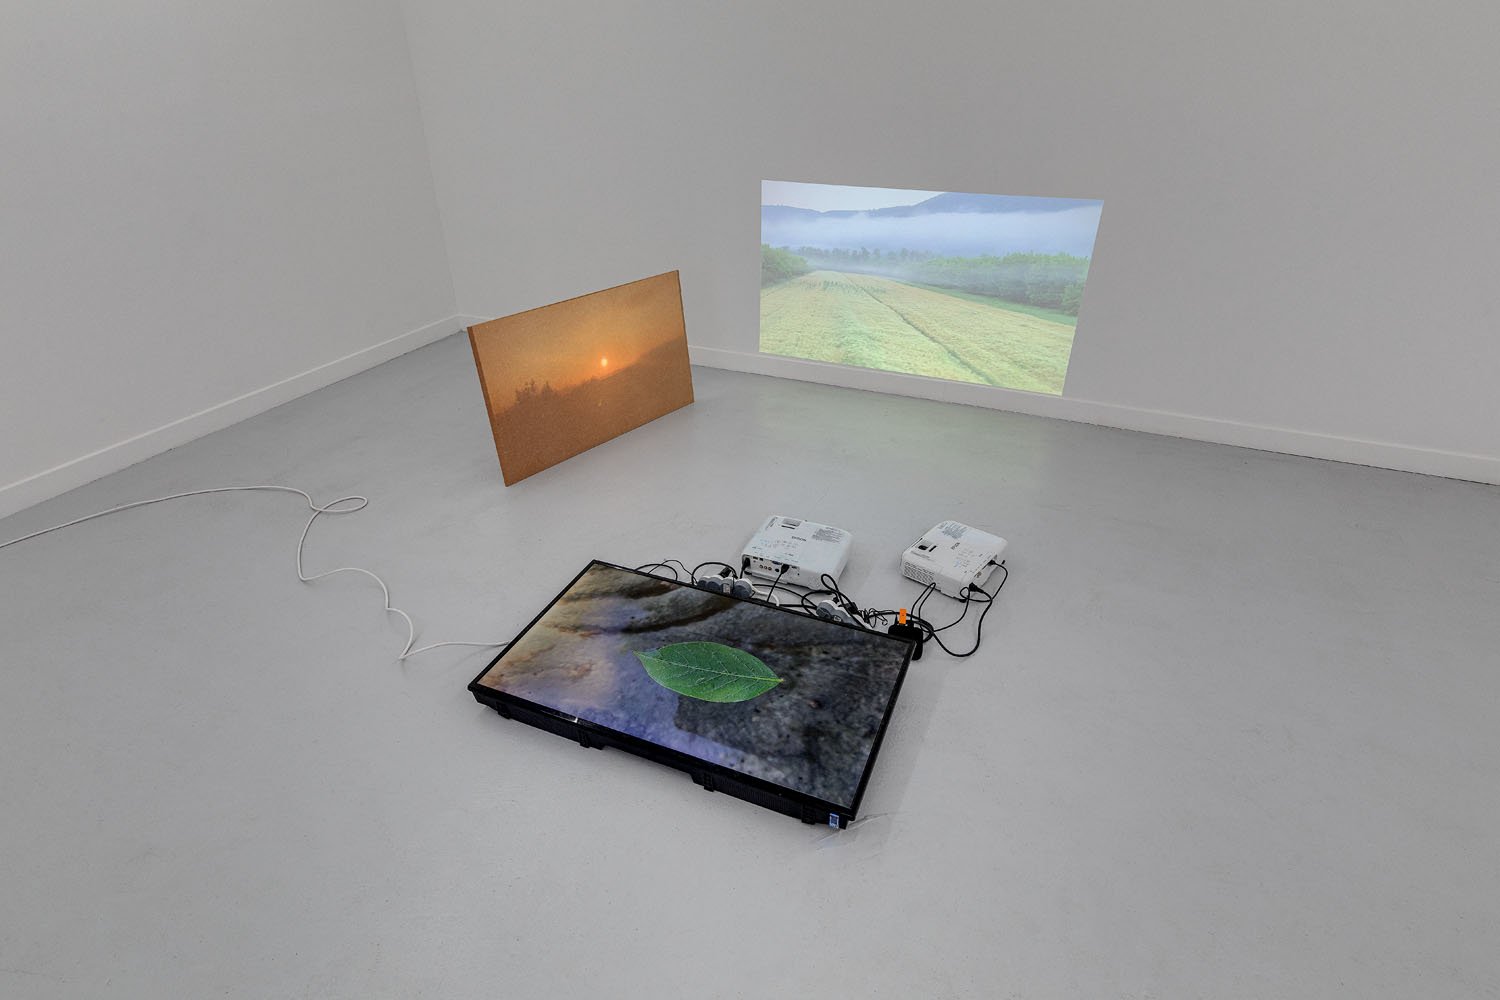 Untitled, 2019-2022, installation with 2 projectors, 1 TV screen, electrical cables, selection of looping videos